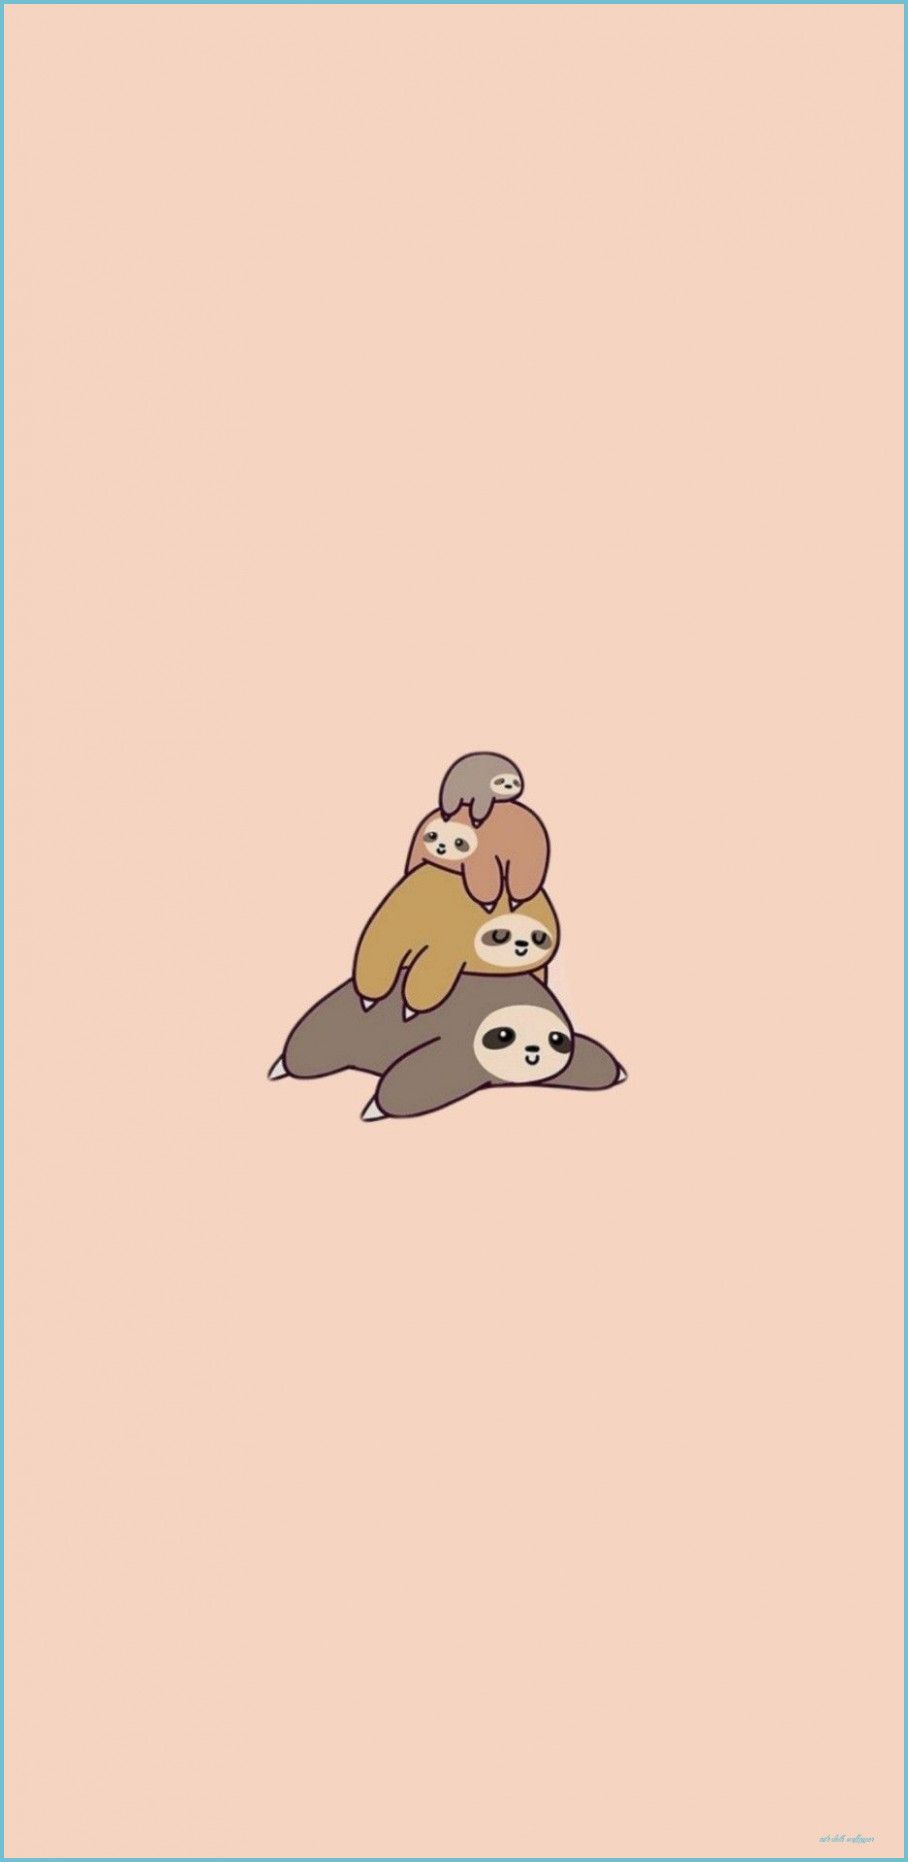 Things You Didn't Know About Cute Sloth Wallpaper